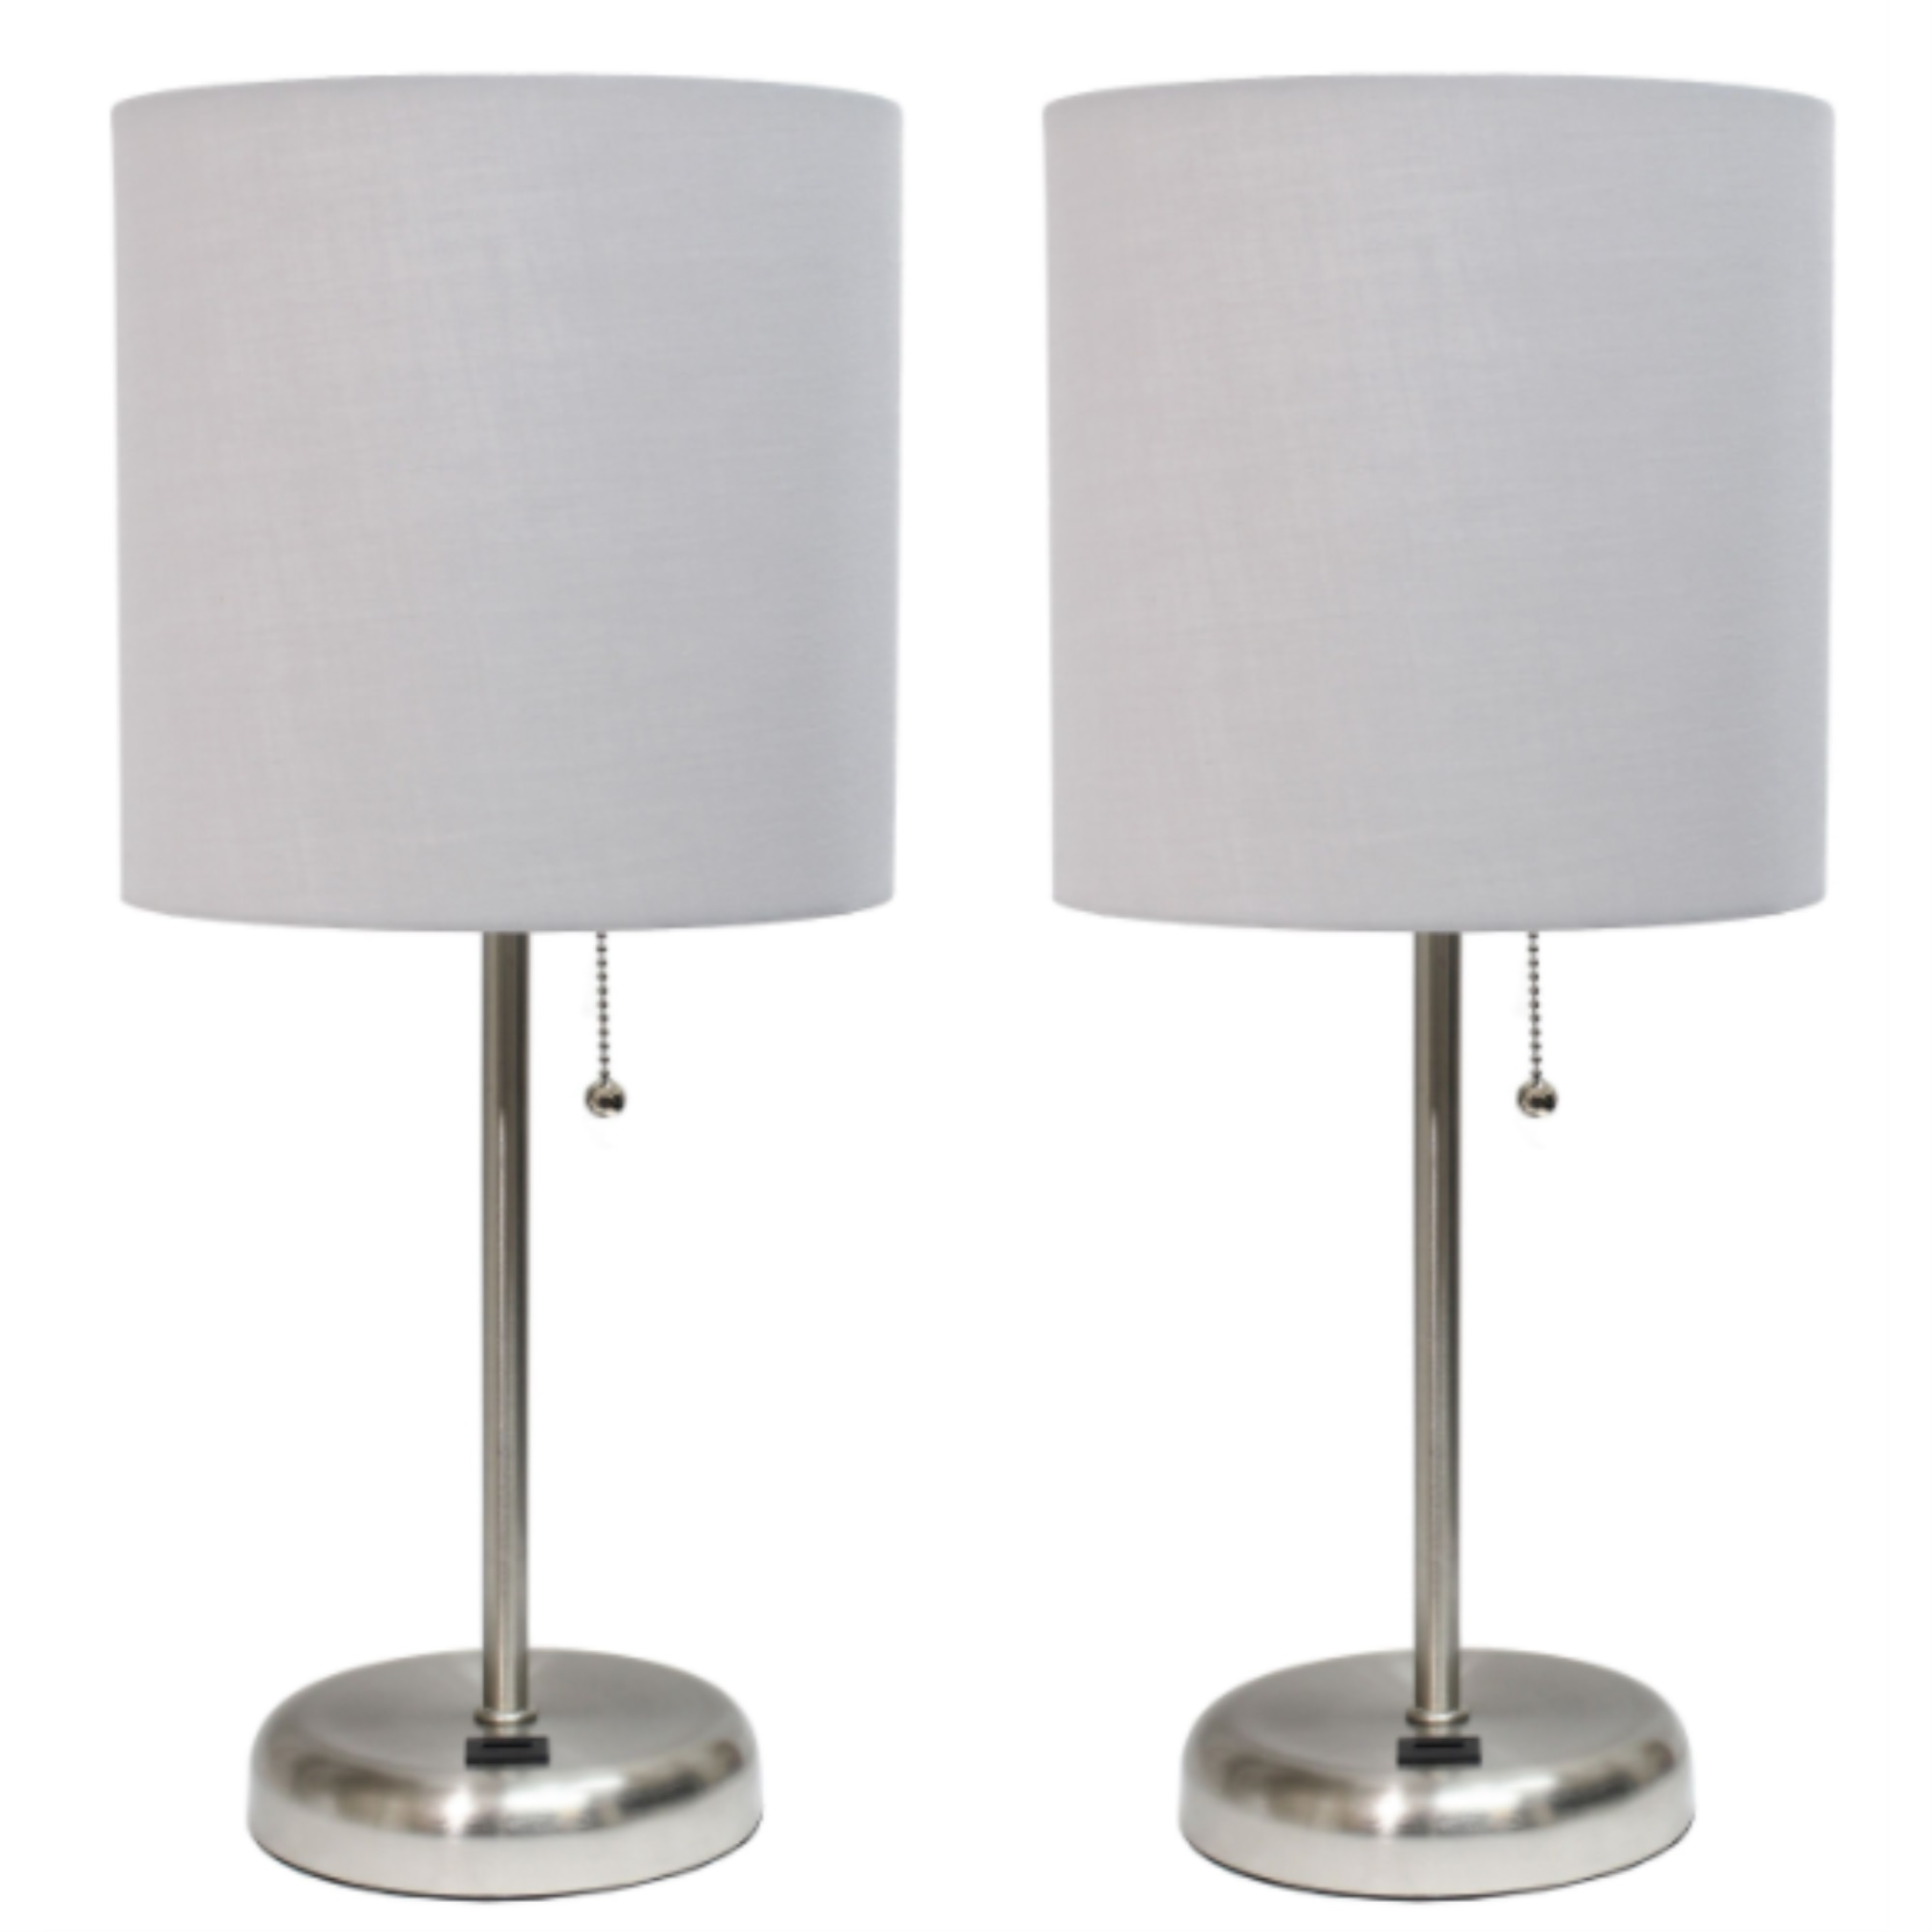 LimeLights Stick Lamp with USB charging port and Fabric Shade 2 Pack Set, Gray